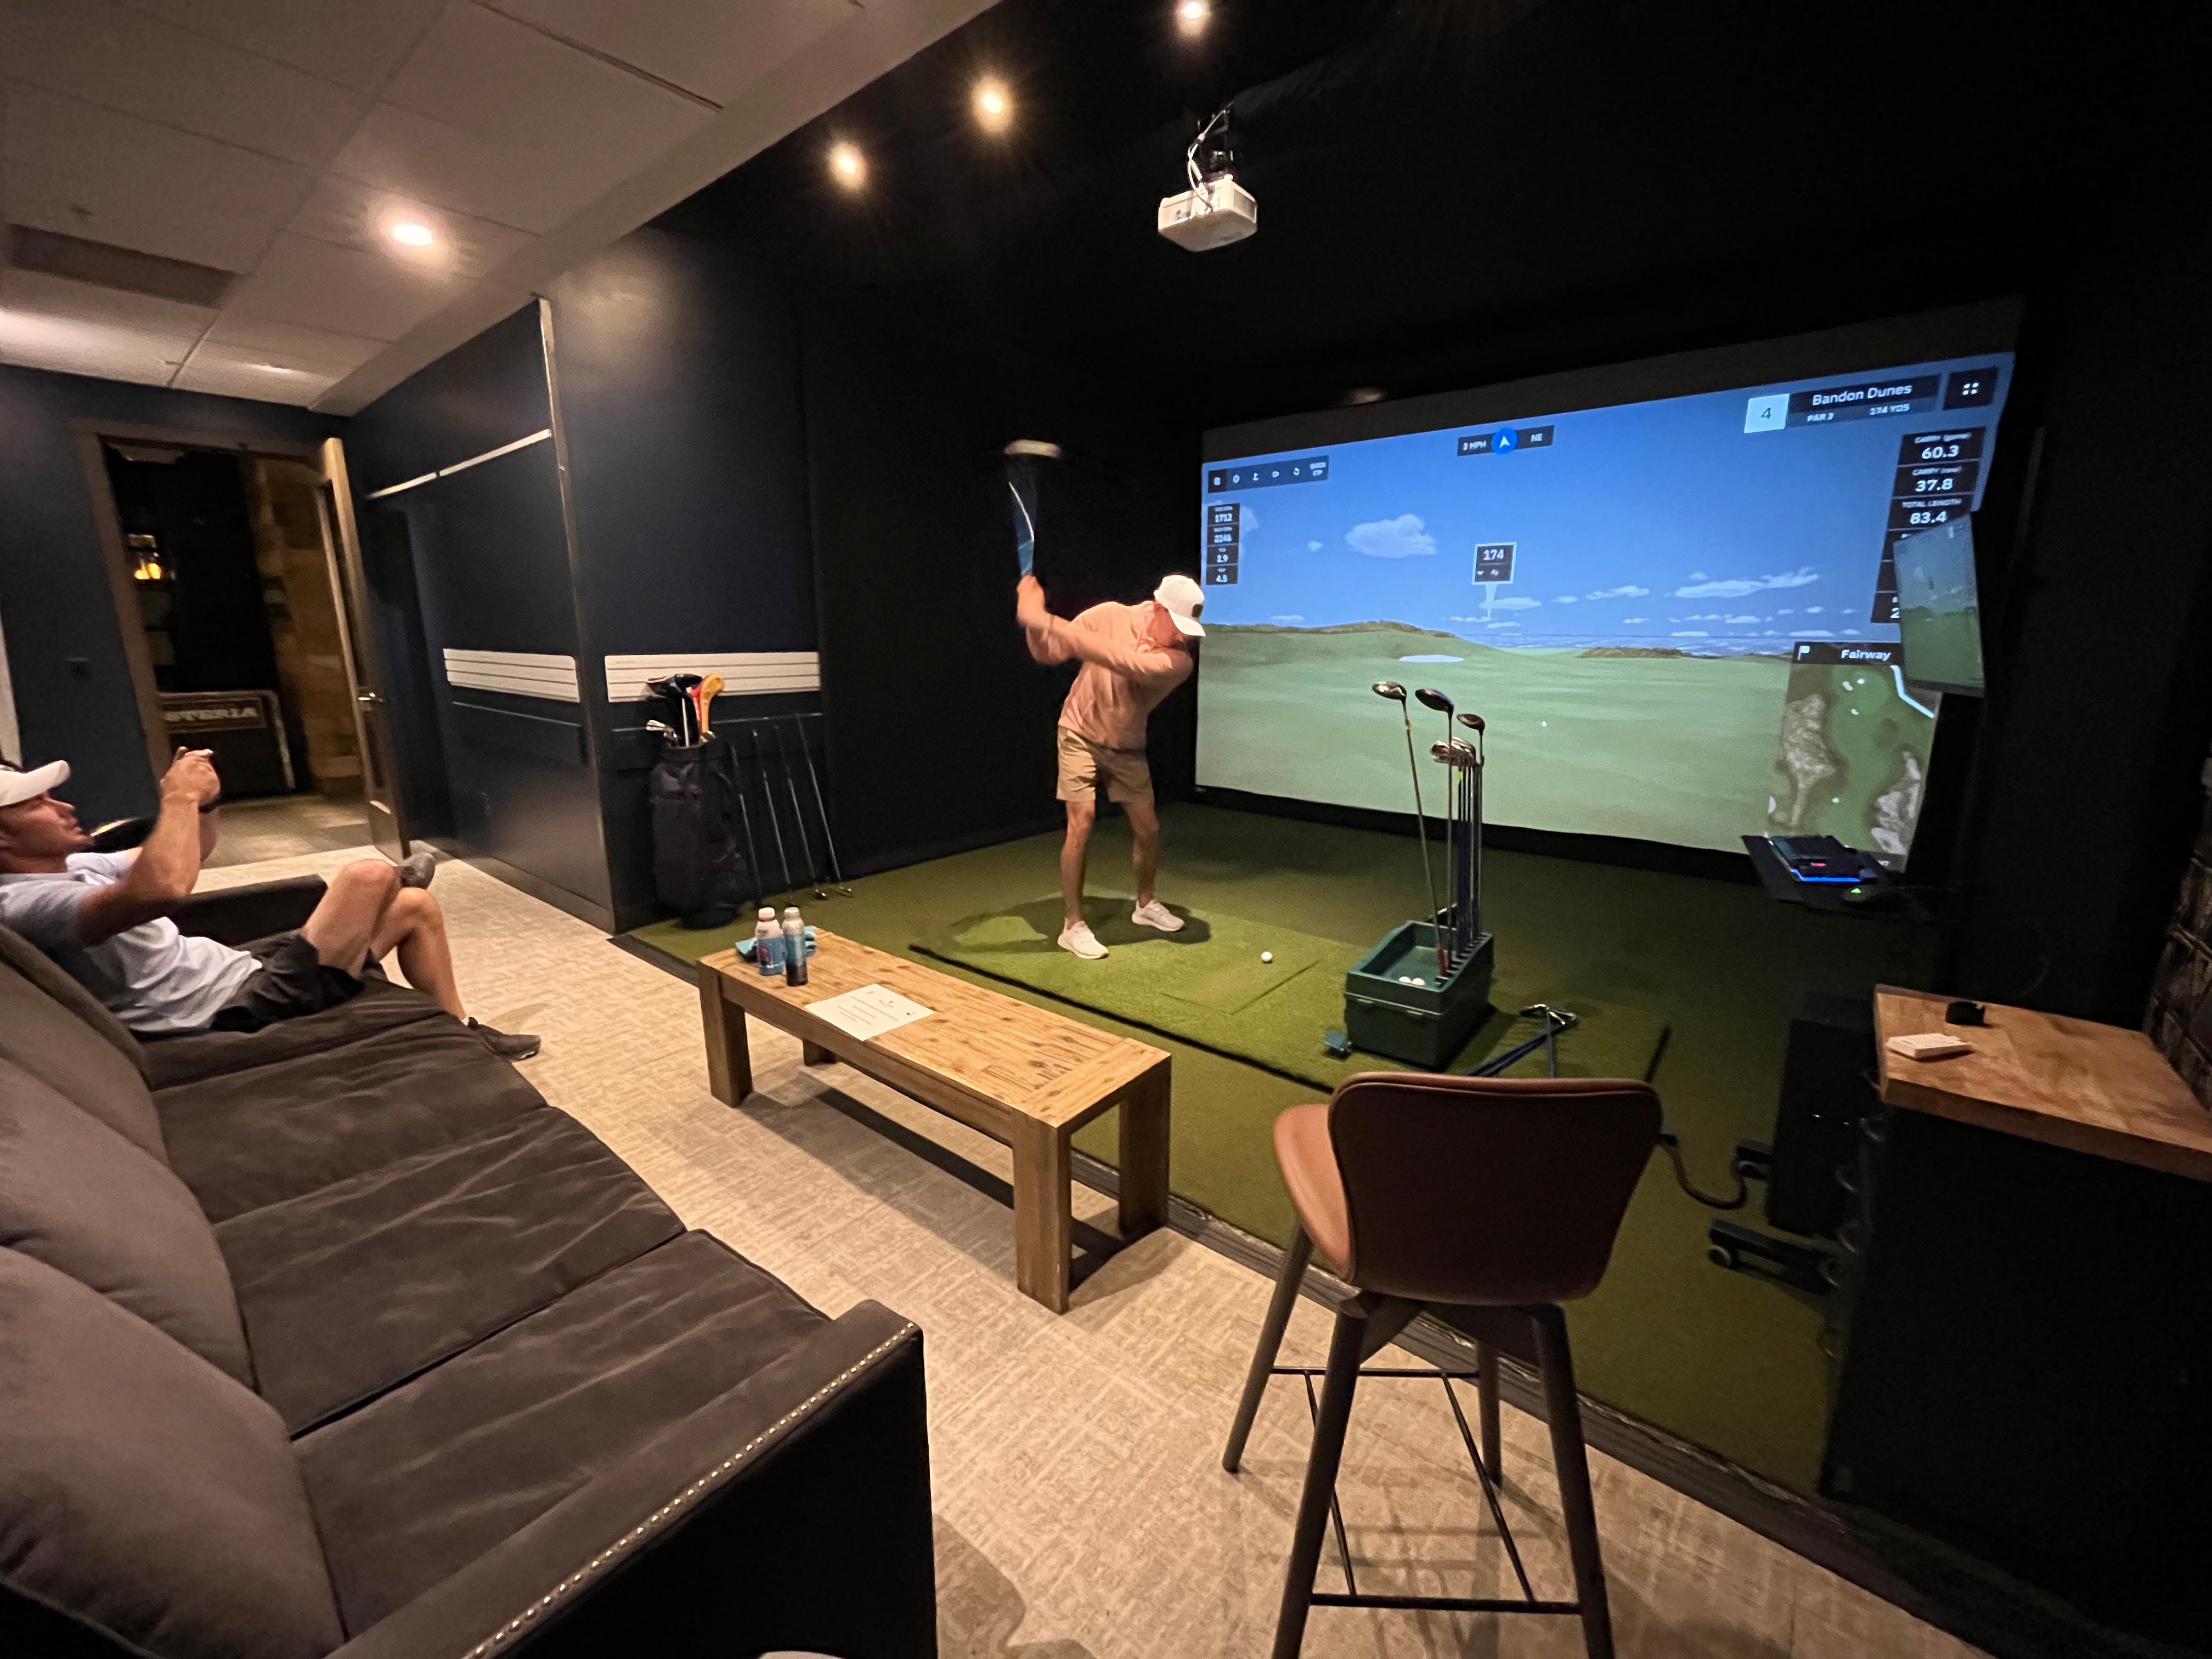 Playing golf on an indoor golf simulator at Hotel Terra in Jackson Hole, Wyoming